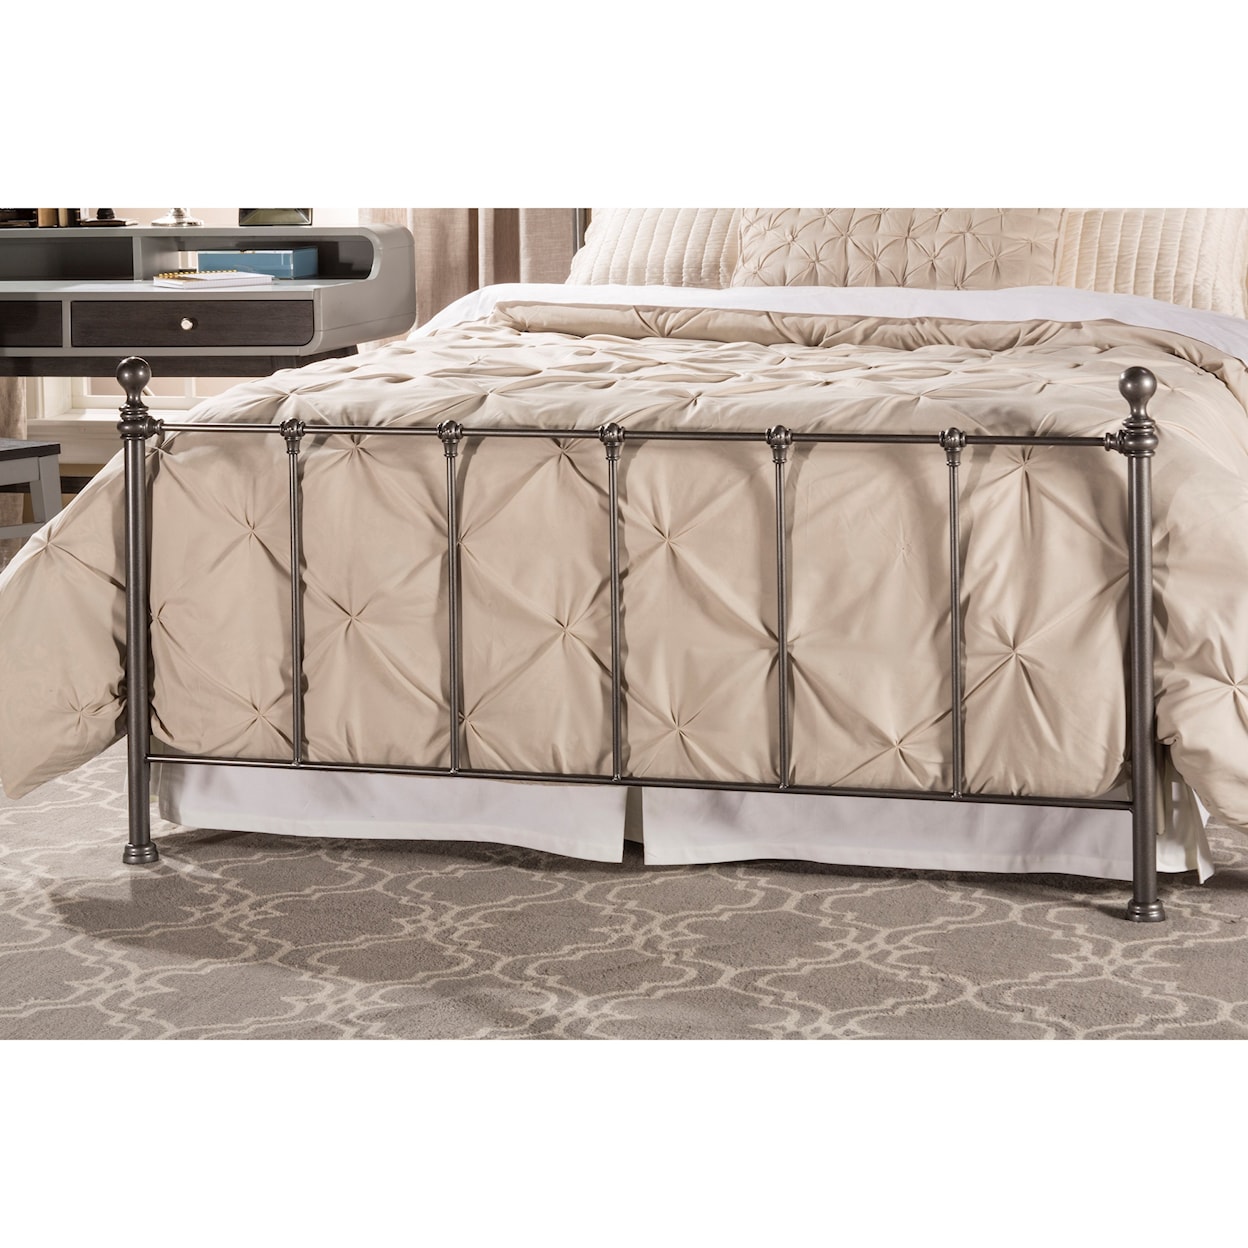 Hillsdale Metal Beds Twin Bed Set